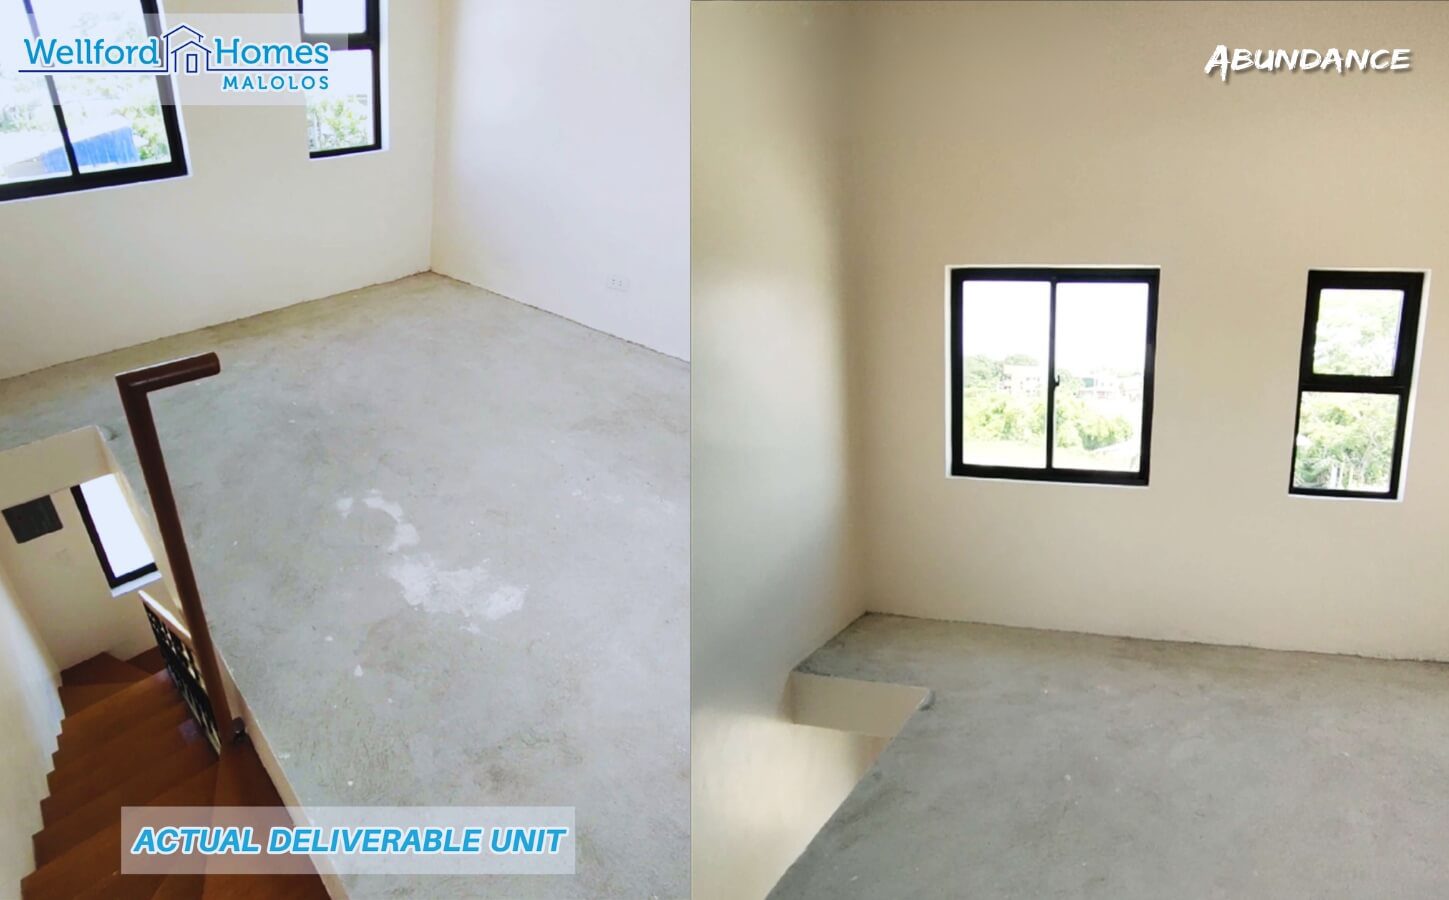 Actual Second floor - Yvonne - Wellford Homes Malolos